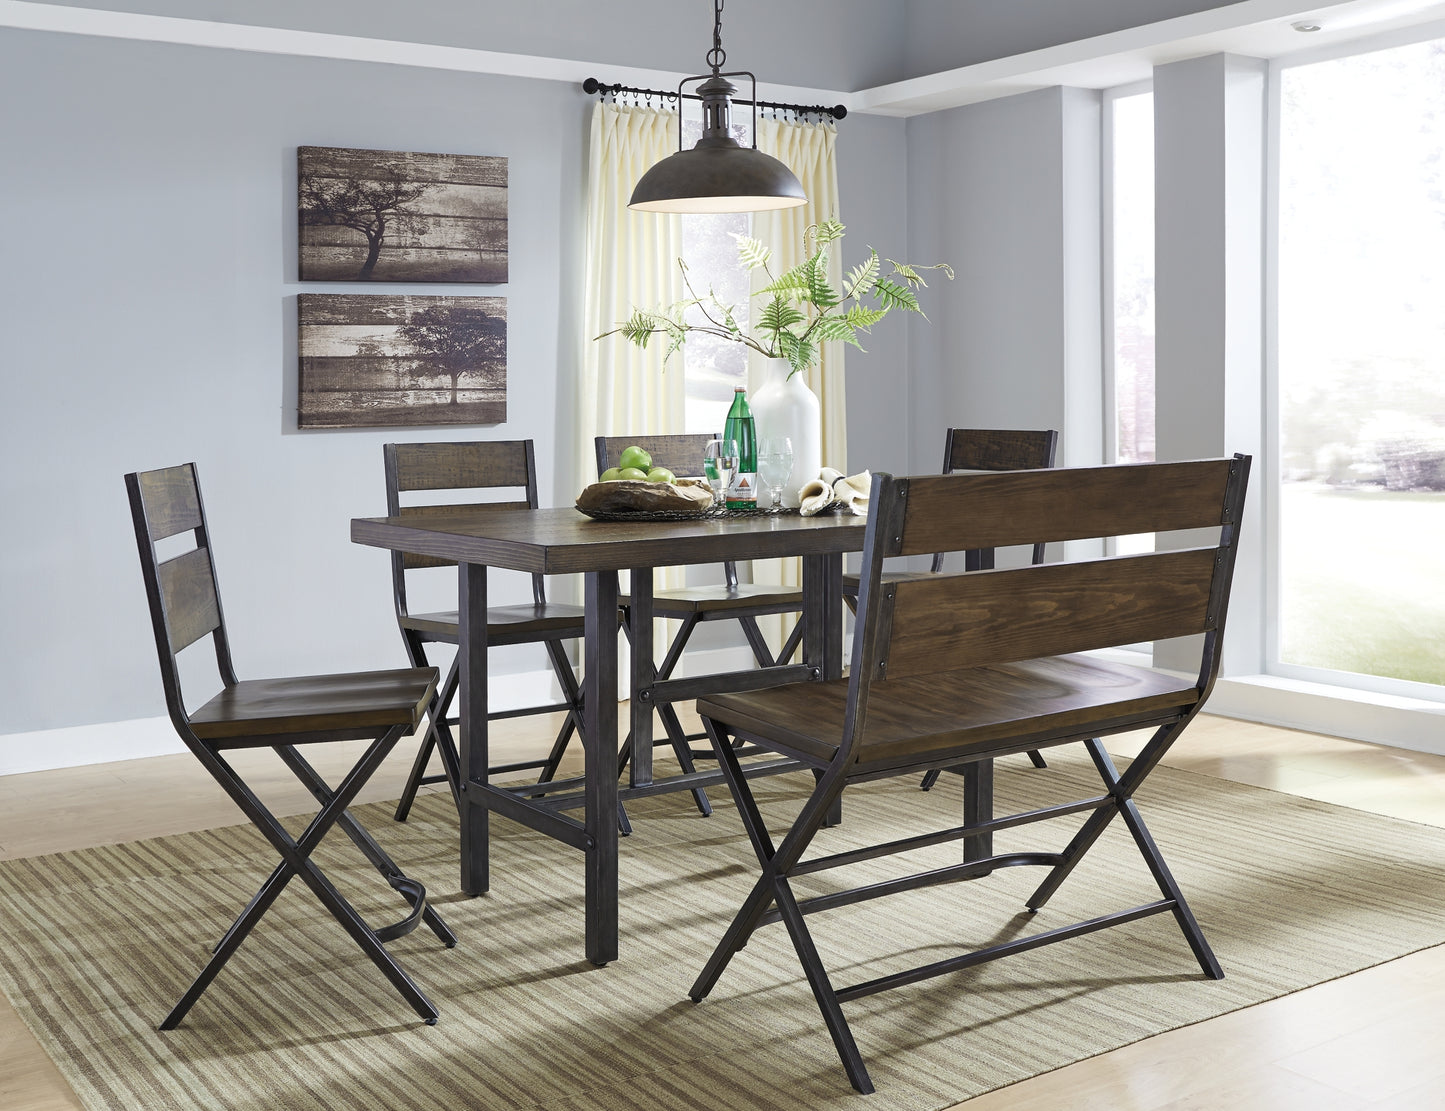 Kavara Counter Height Dining Table and 4 Barstools and Bench Wilson Furniture (OH)  in Bridgeport, Ohio. Serving Bridgeport, Yorkville, Bellaire, & Avondale